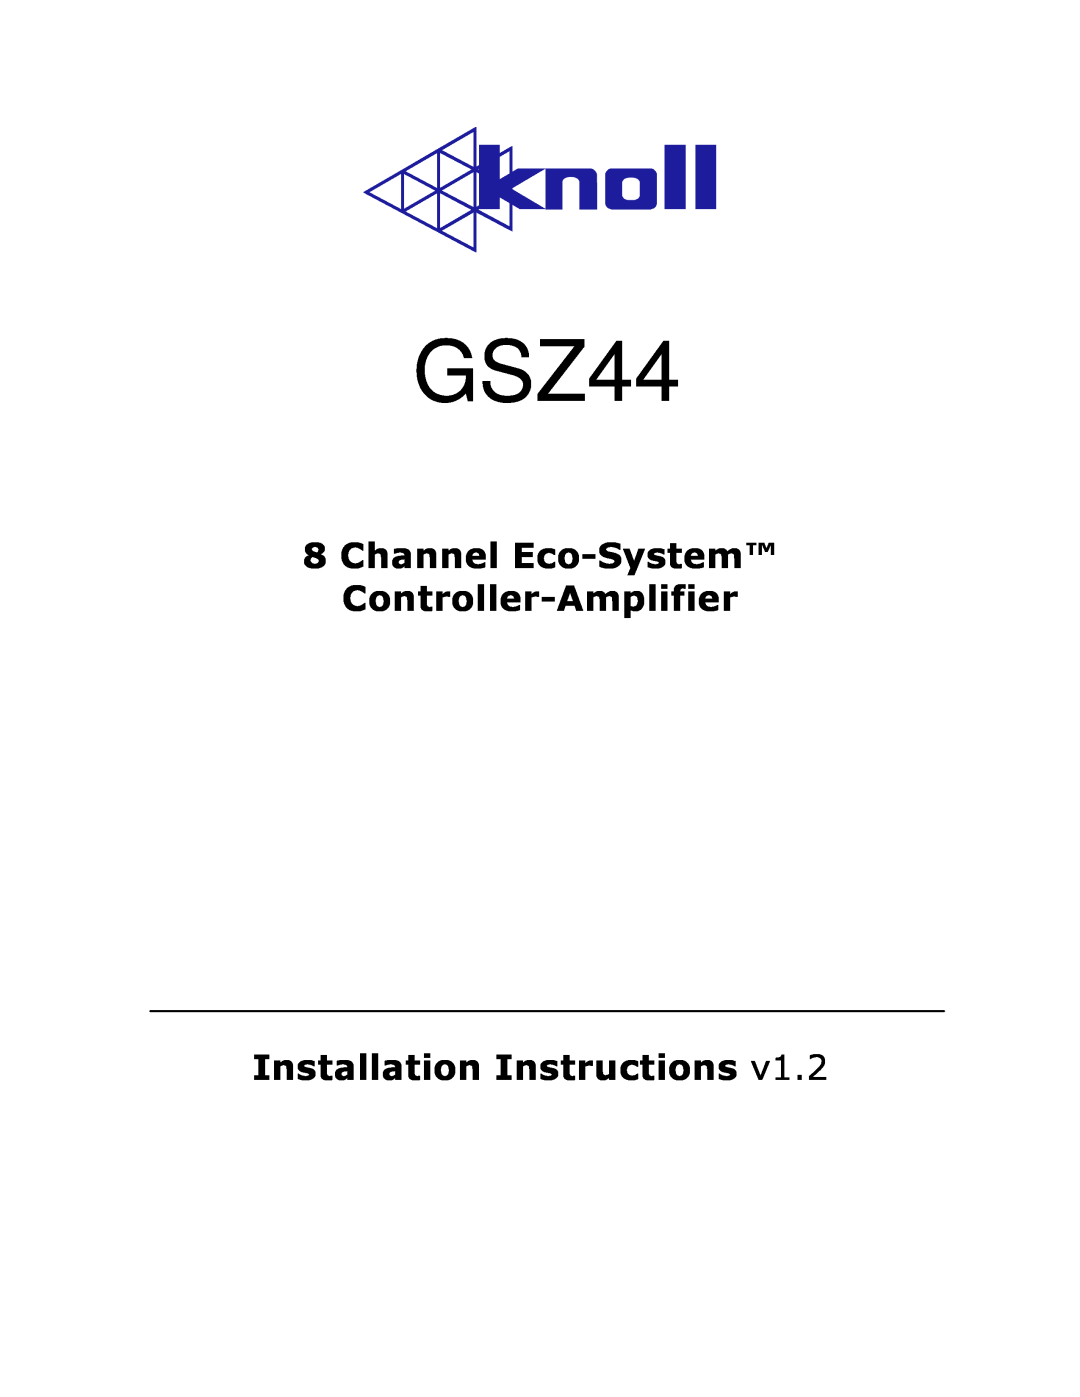 Knoll Systems GSZ44 installation instructions 8Channel Eco-System Controller-Amplifier, Installation Instructions 